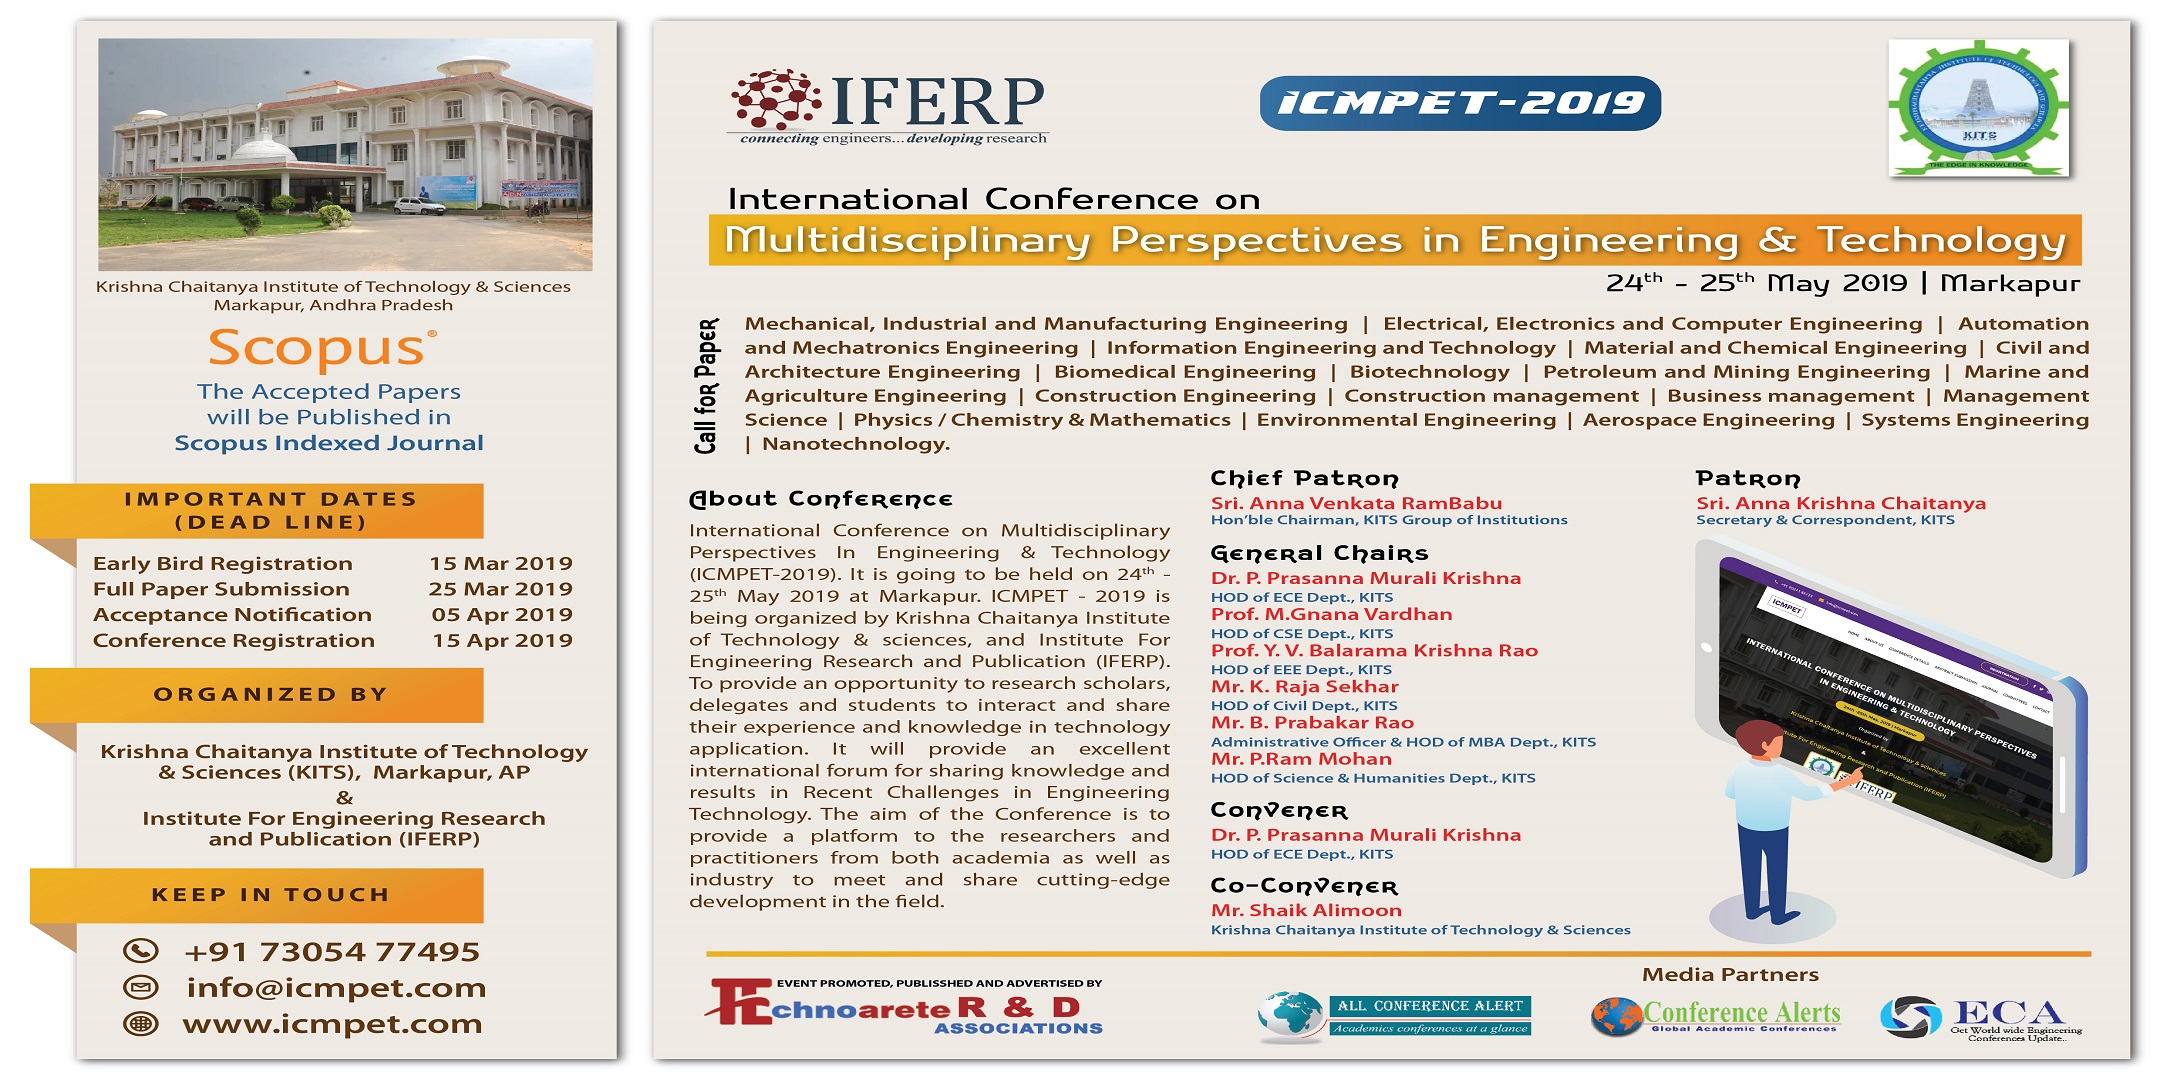 International Conference on “Multidisciplinary Perspectives in Engineering & Technology” 